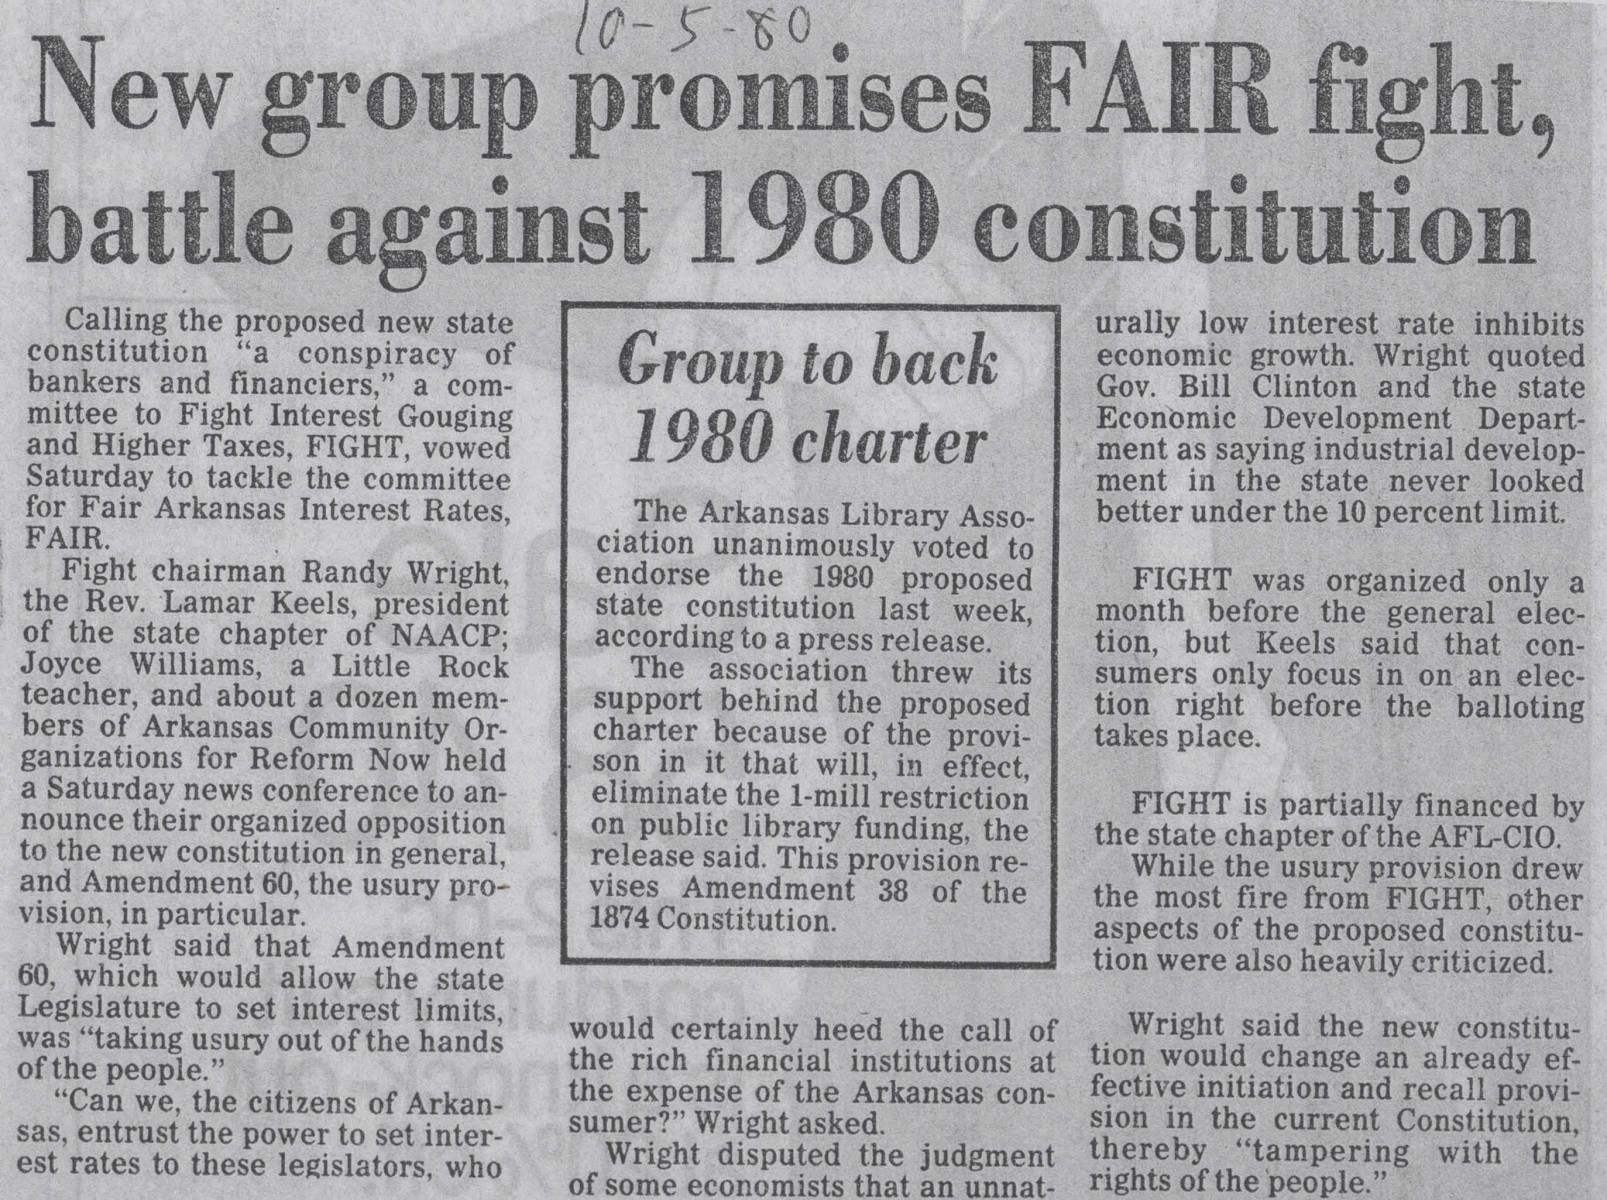 Newspaper clipping titled "New group promises FAIR fight, battle against 1980 constitution"